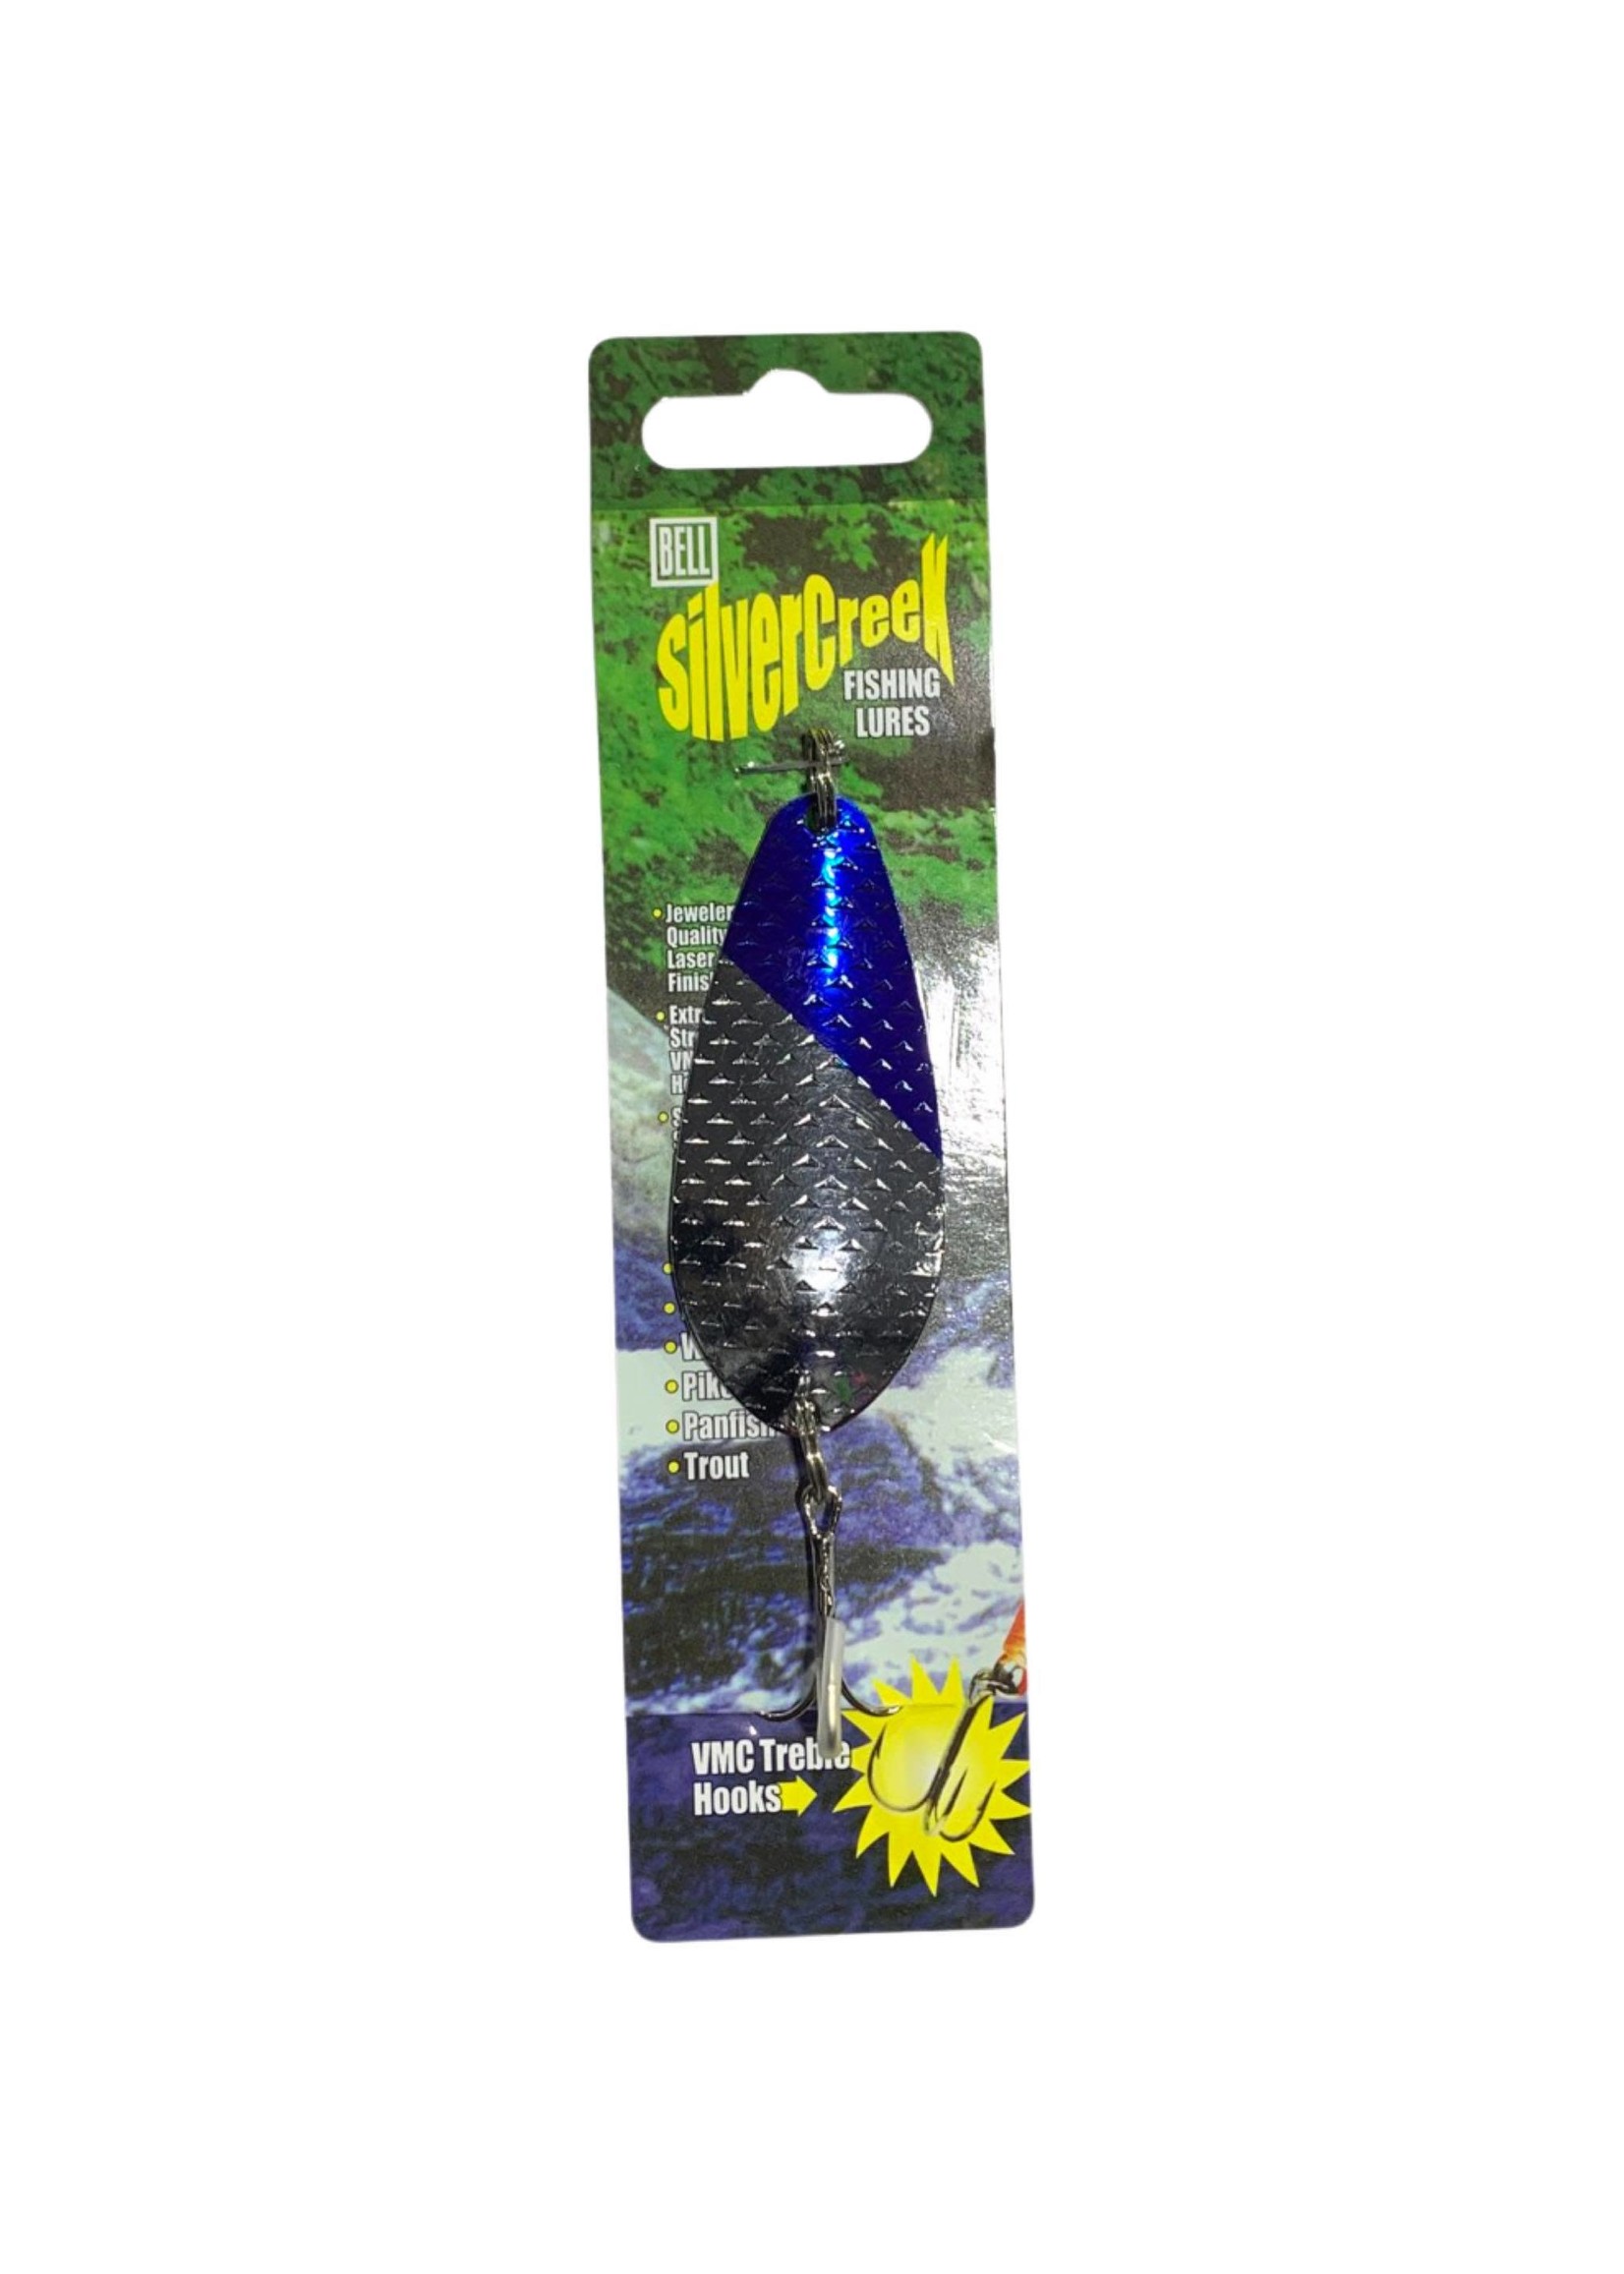 BELL OUTDOOR PRODUCTS SILVER CREEK  LITTLE SILVER FISHING SPOONS  3"